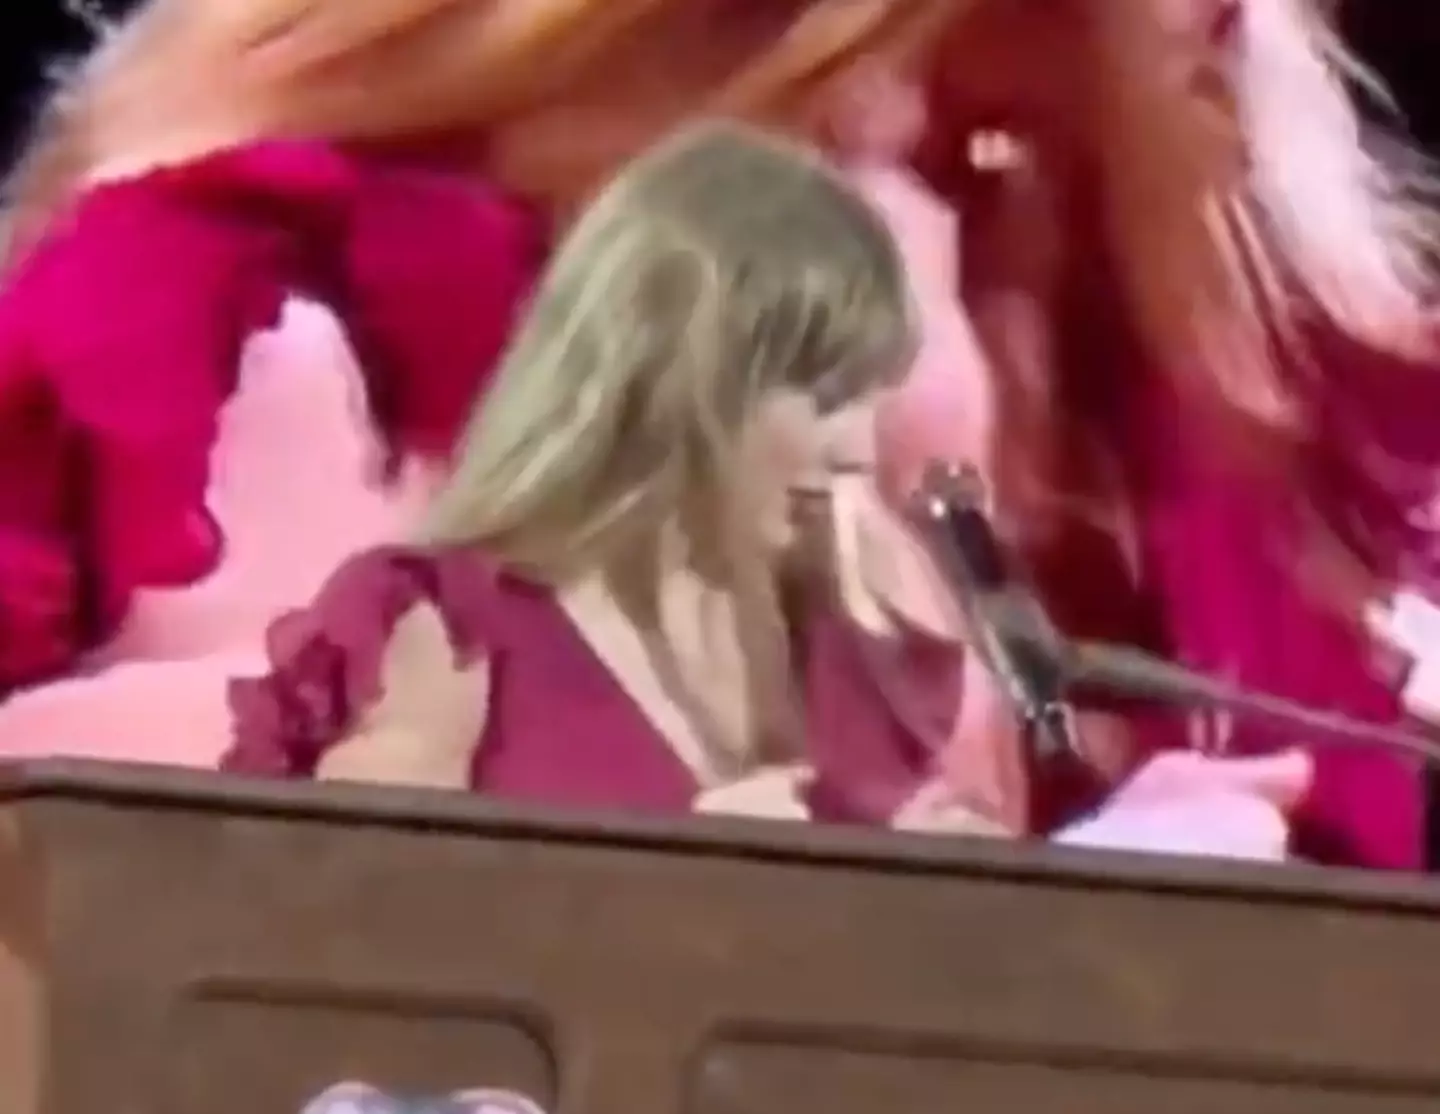 Taylor Swift was baffled by the self-playing piano.